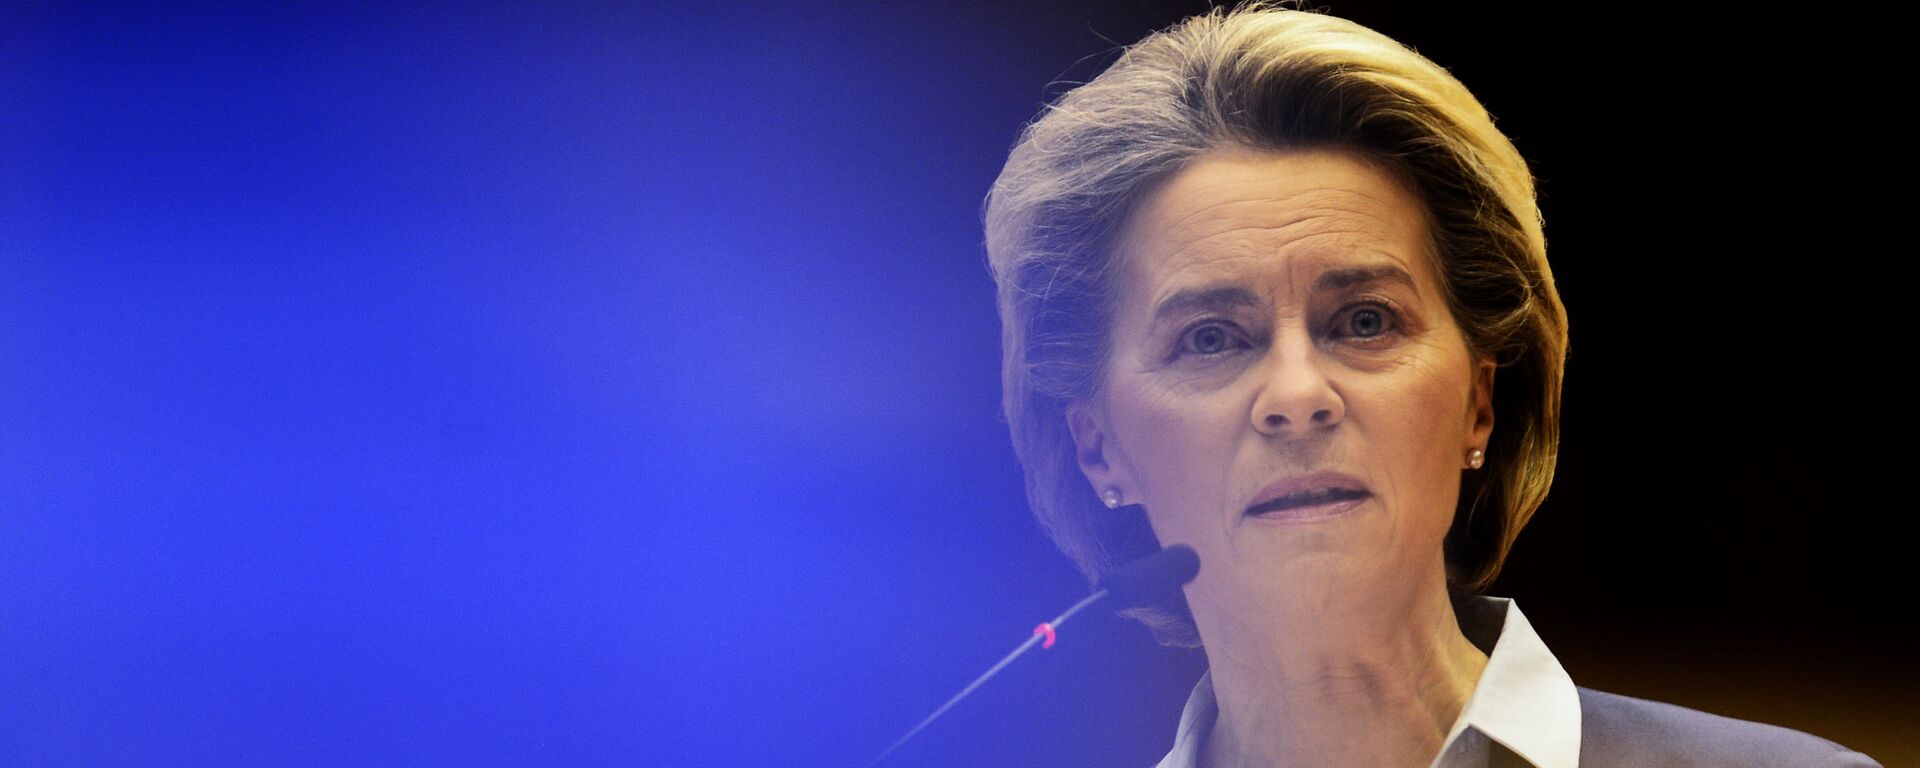 European Commission President Ursula von der Leyen speaks during a debate on the united EU approach to COVID-19 vaccinations at the European Parliament in Brussels, Wednesday, Feb. 10, 2021 - Sputnik International, 1920, 16.09.2021